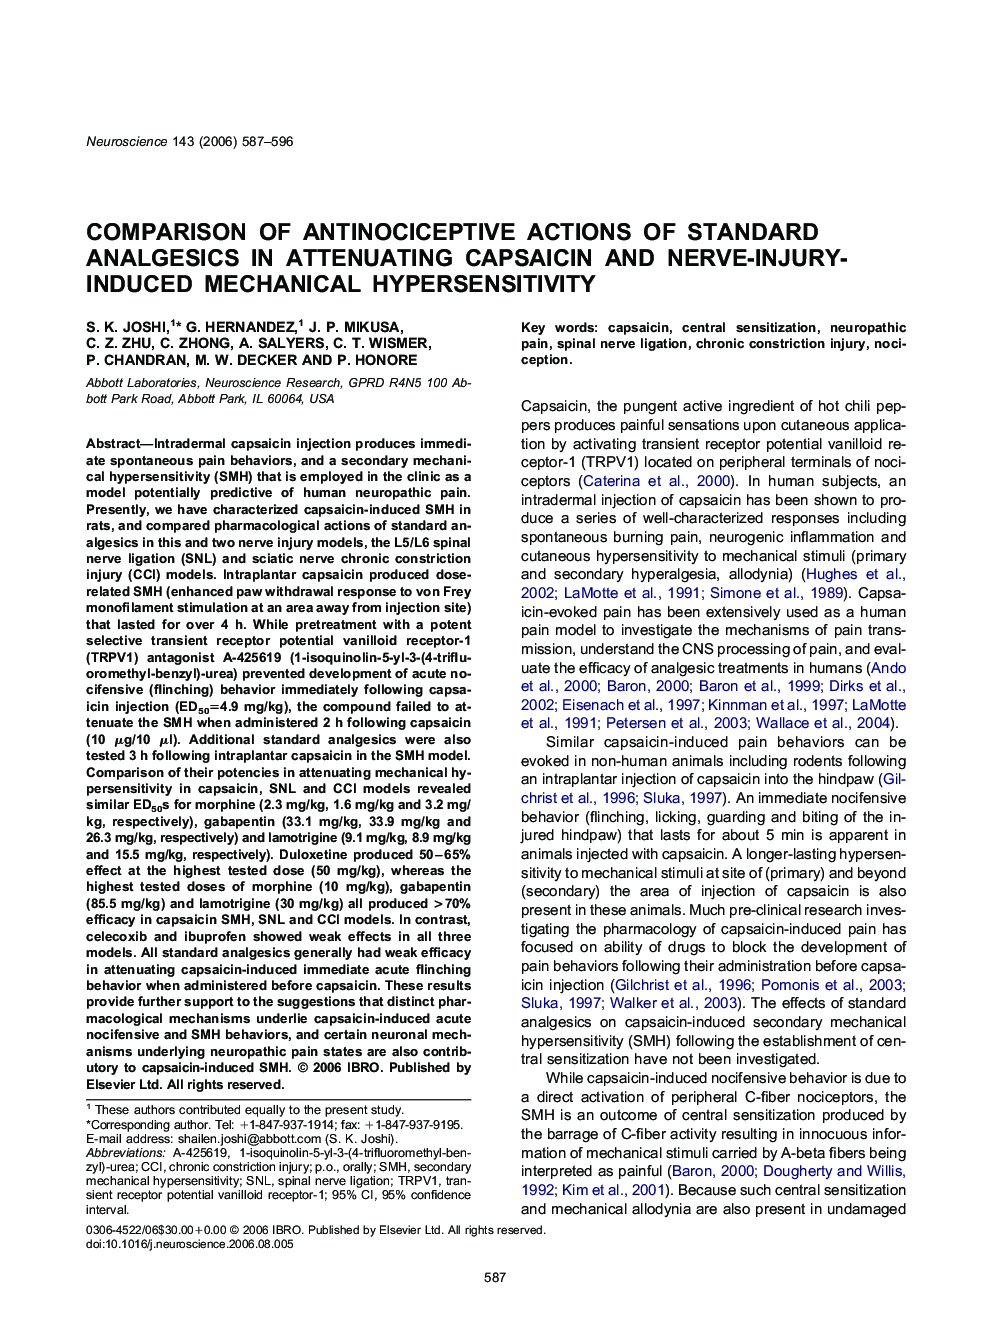 Comparison of antinociceptive actions of standard analgesics in attenuating capsaicin and nerve-injury-induced mechanical hypersensitivity